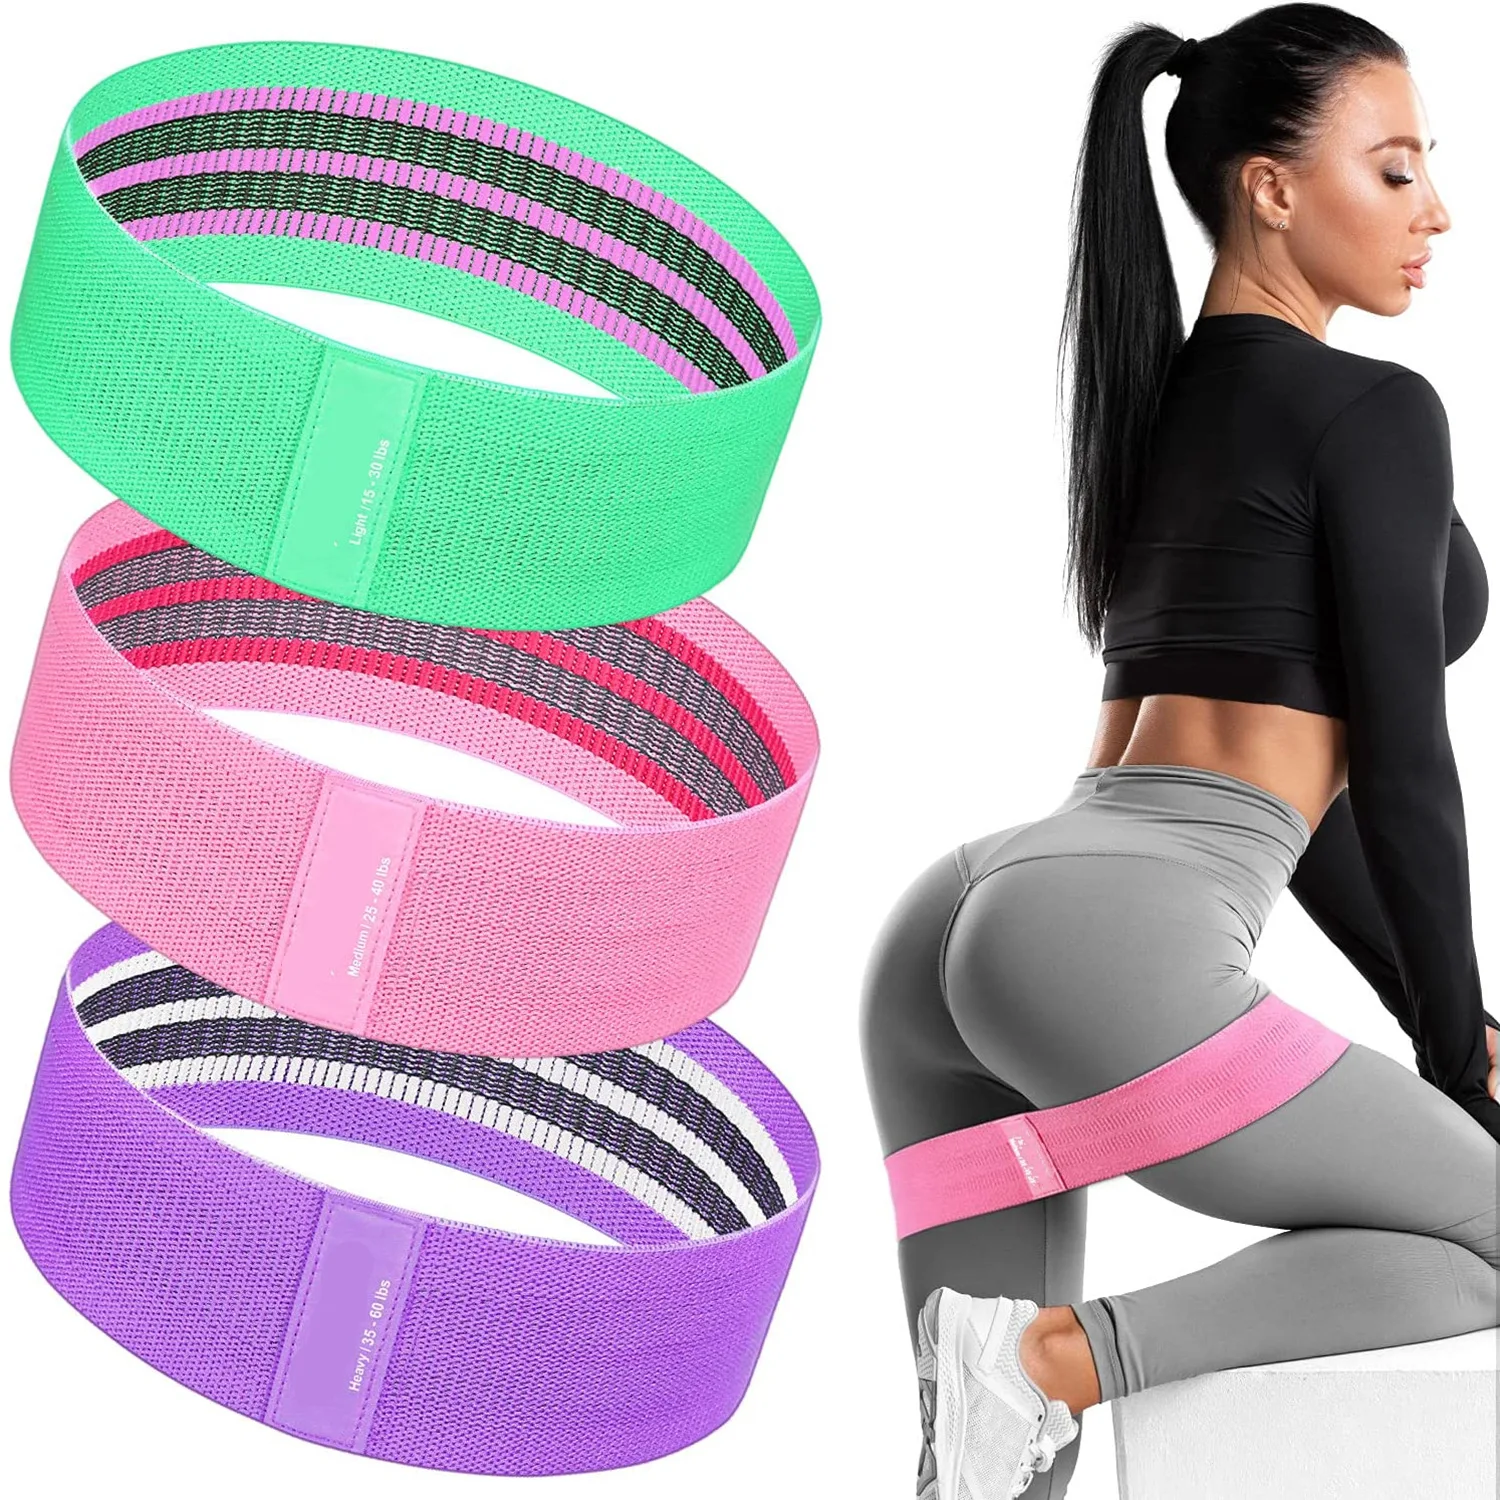 Best Resistance Elastic Fabric Exercise Workout Bands for Legs Butt Fitness Booty Loops Bands for Home Gym Yoga Weights Squats sherri baptiste yoga with weights for dummies